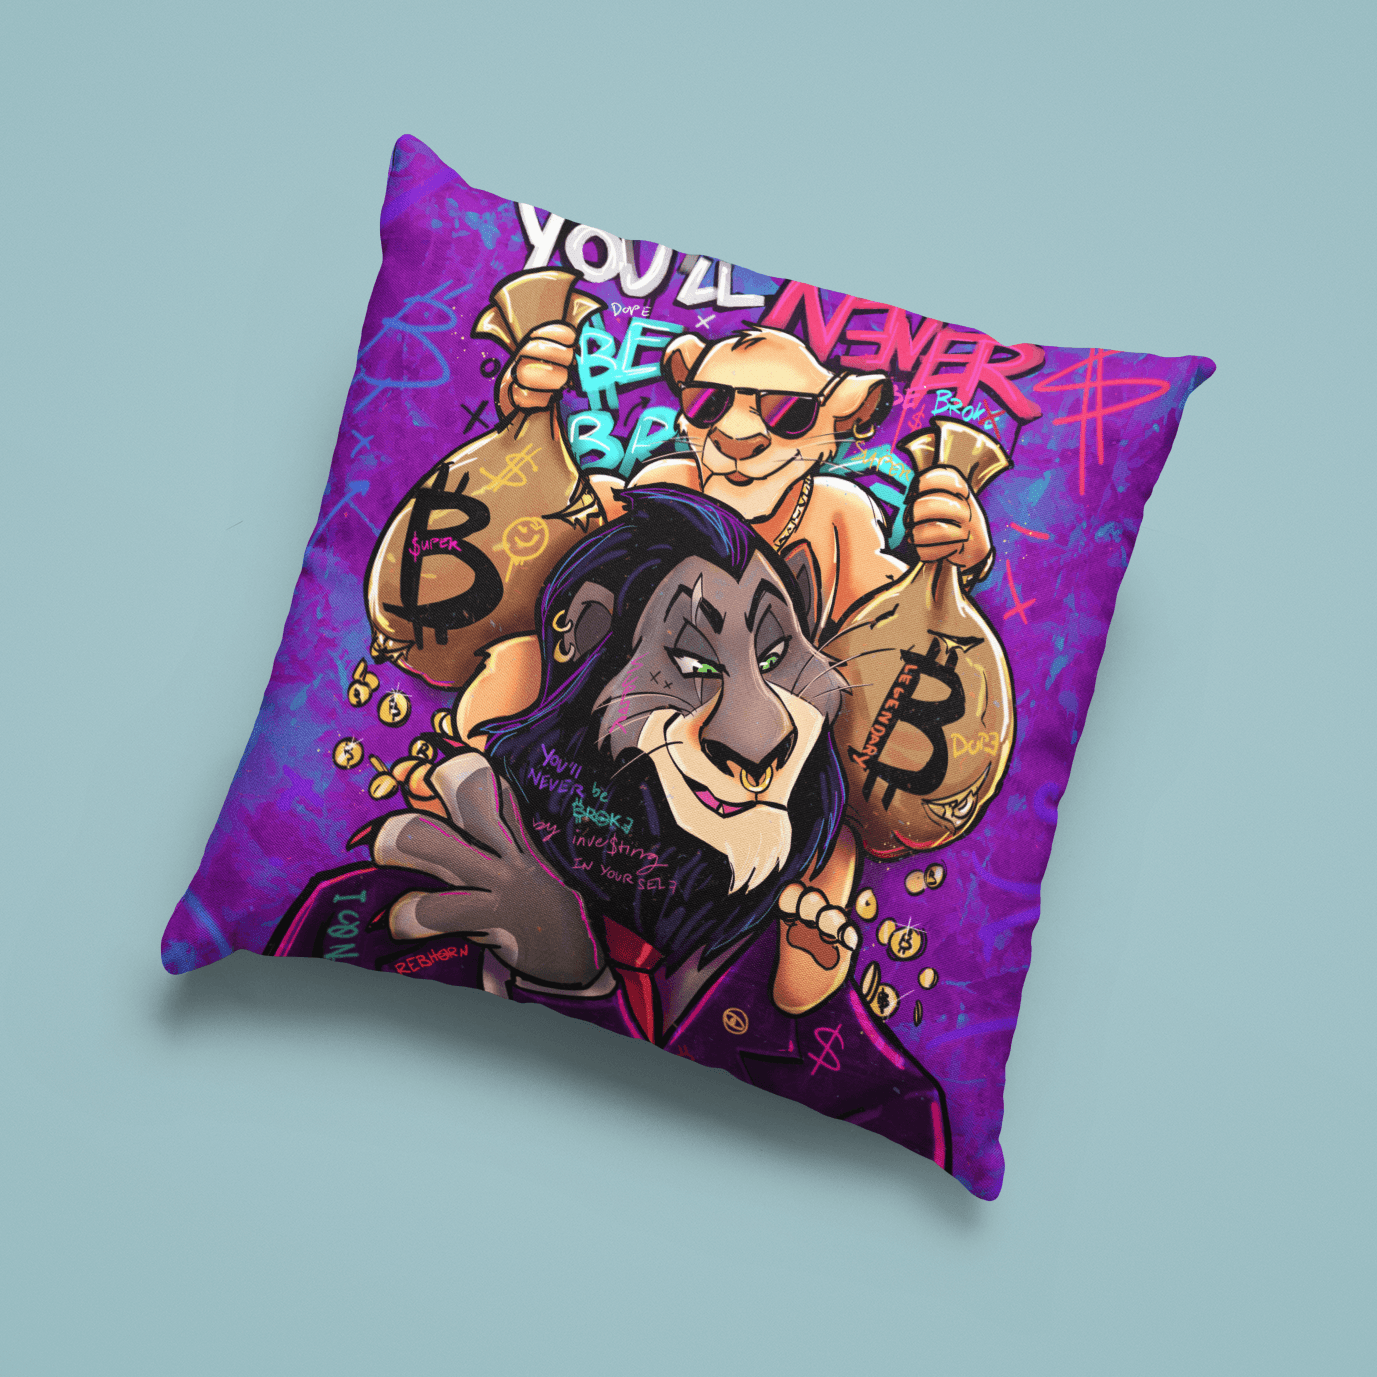 YOU’LL NEVER BE BROKE BY INVESTING IN YOURSELF PREMIUM PILLOW - REBHORN DESIGN